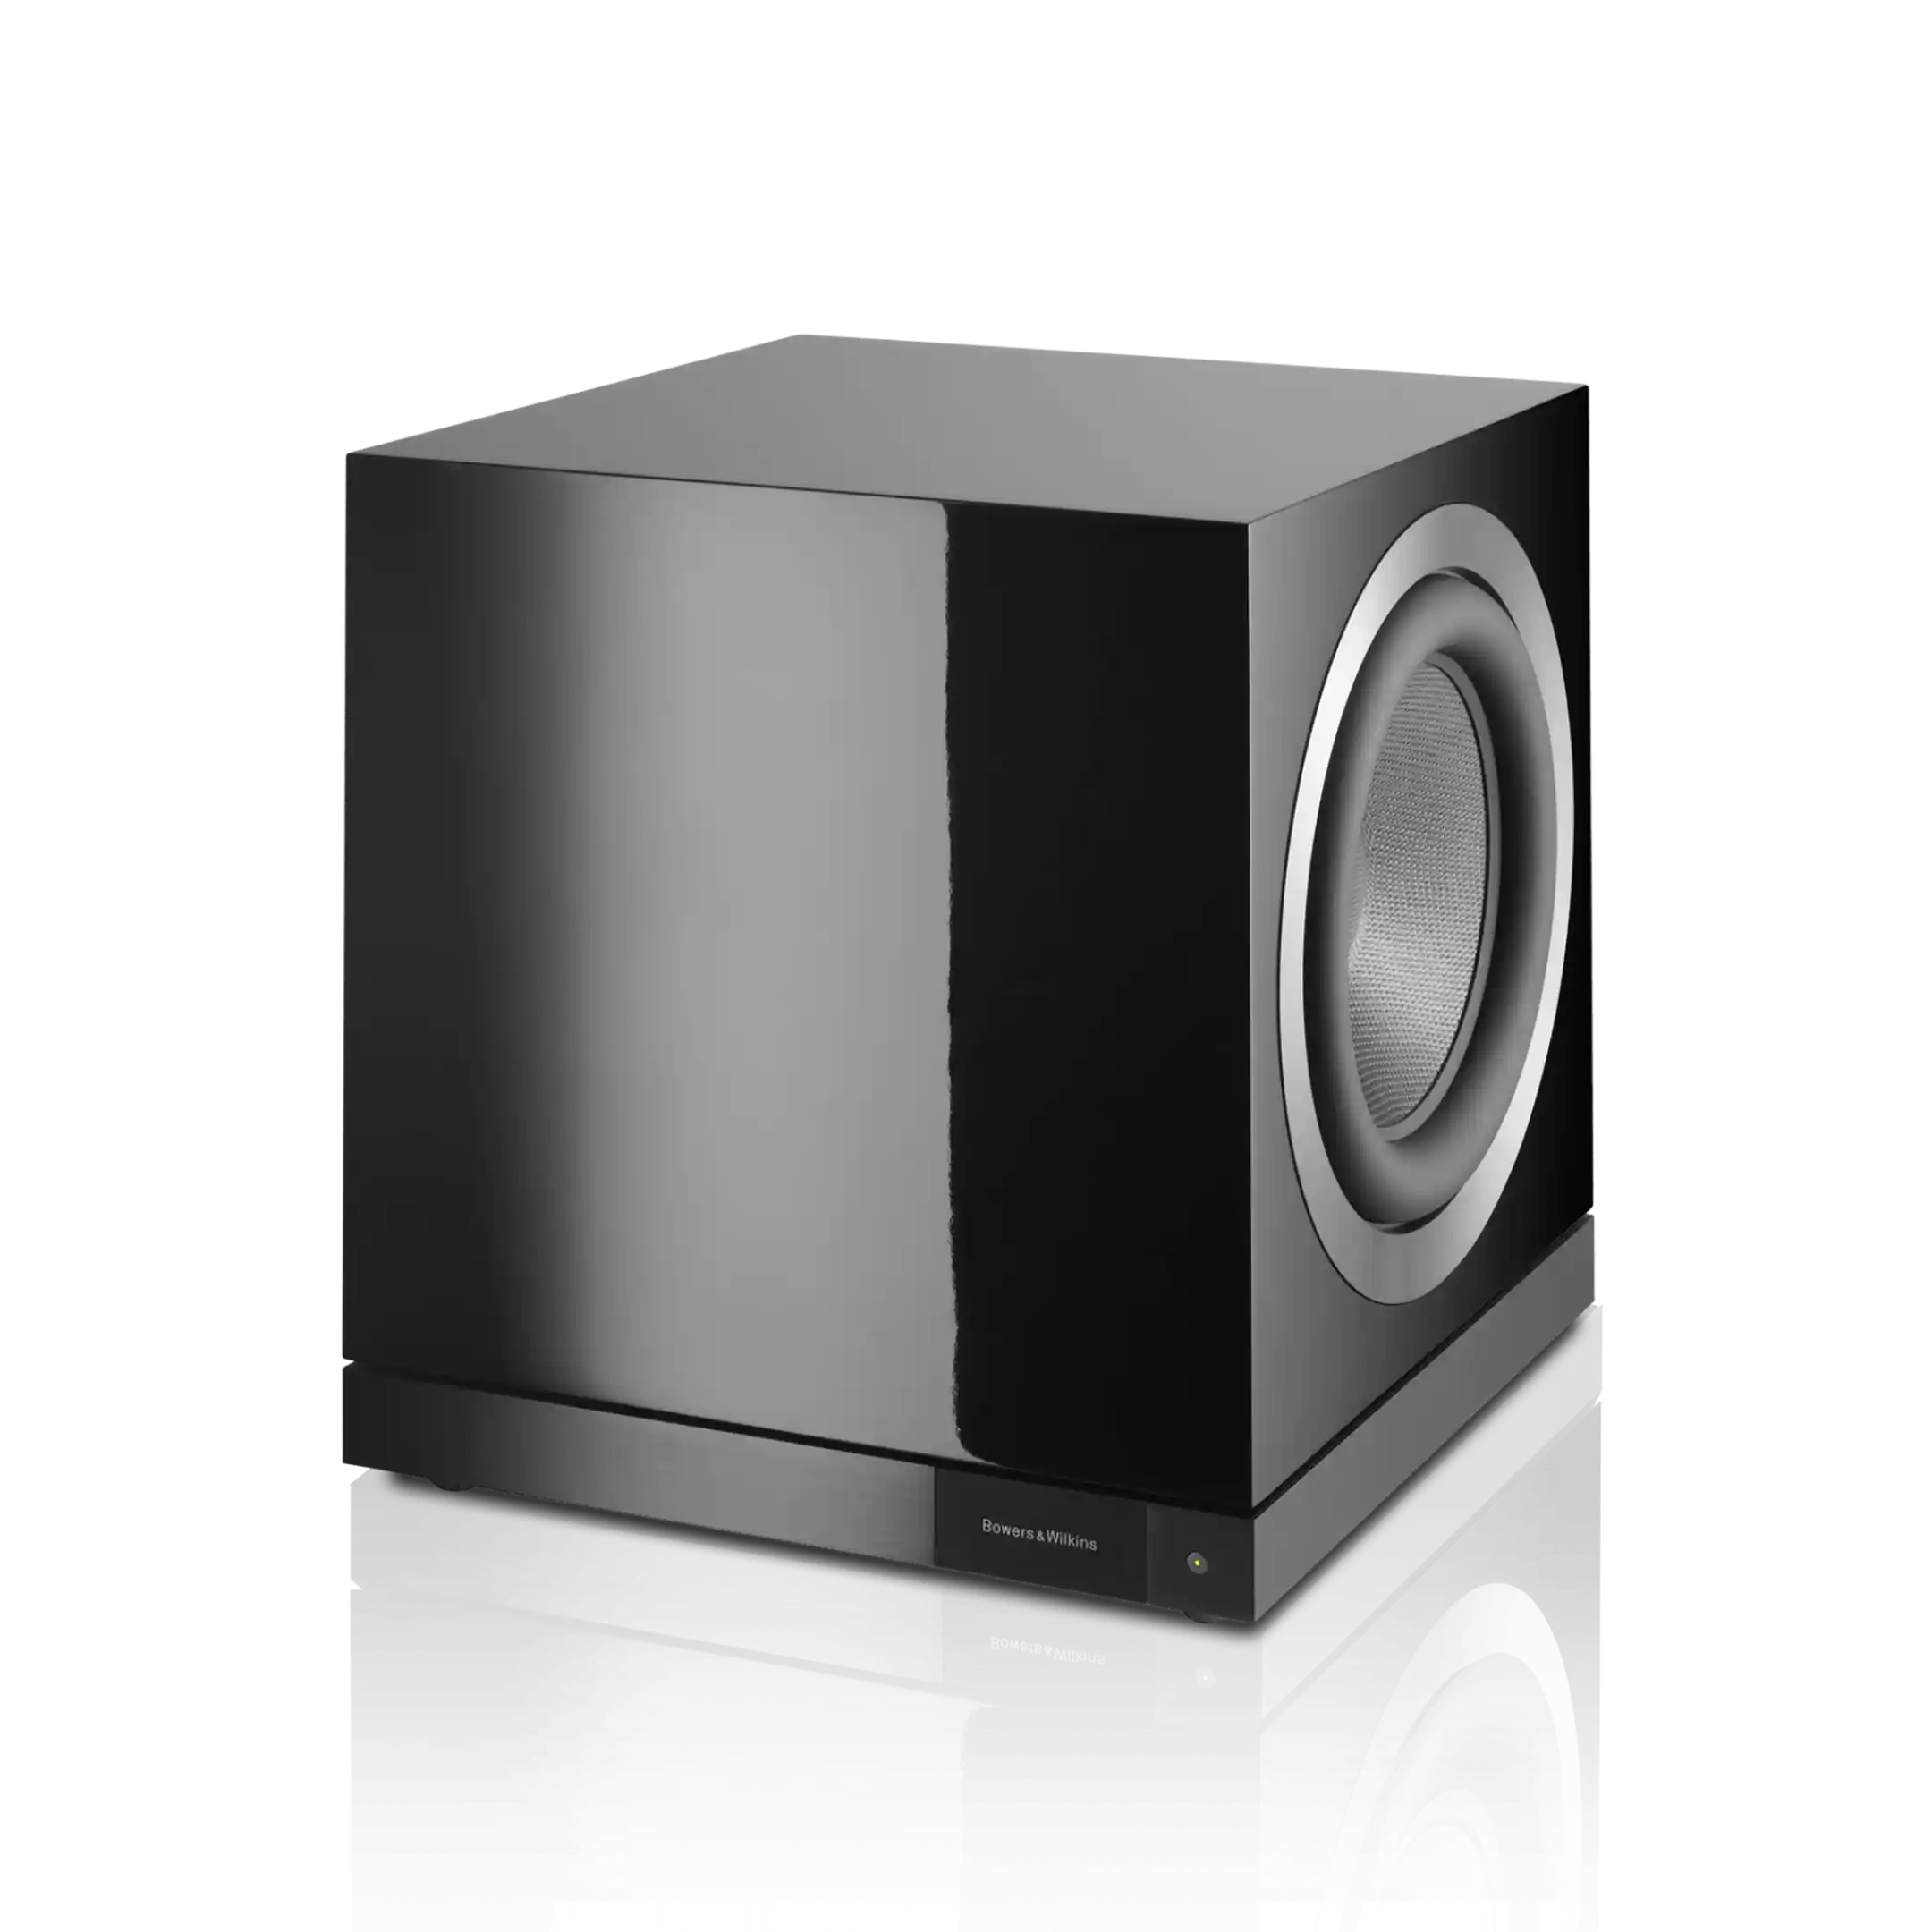 Bowers & Wilkins Subwoofer DB2D